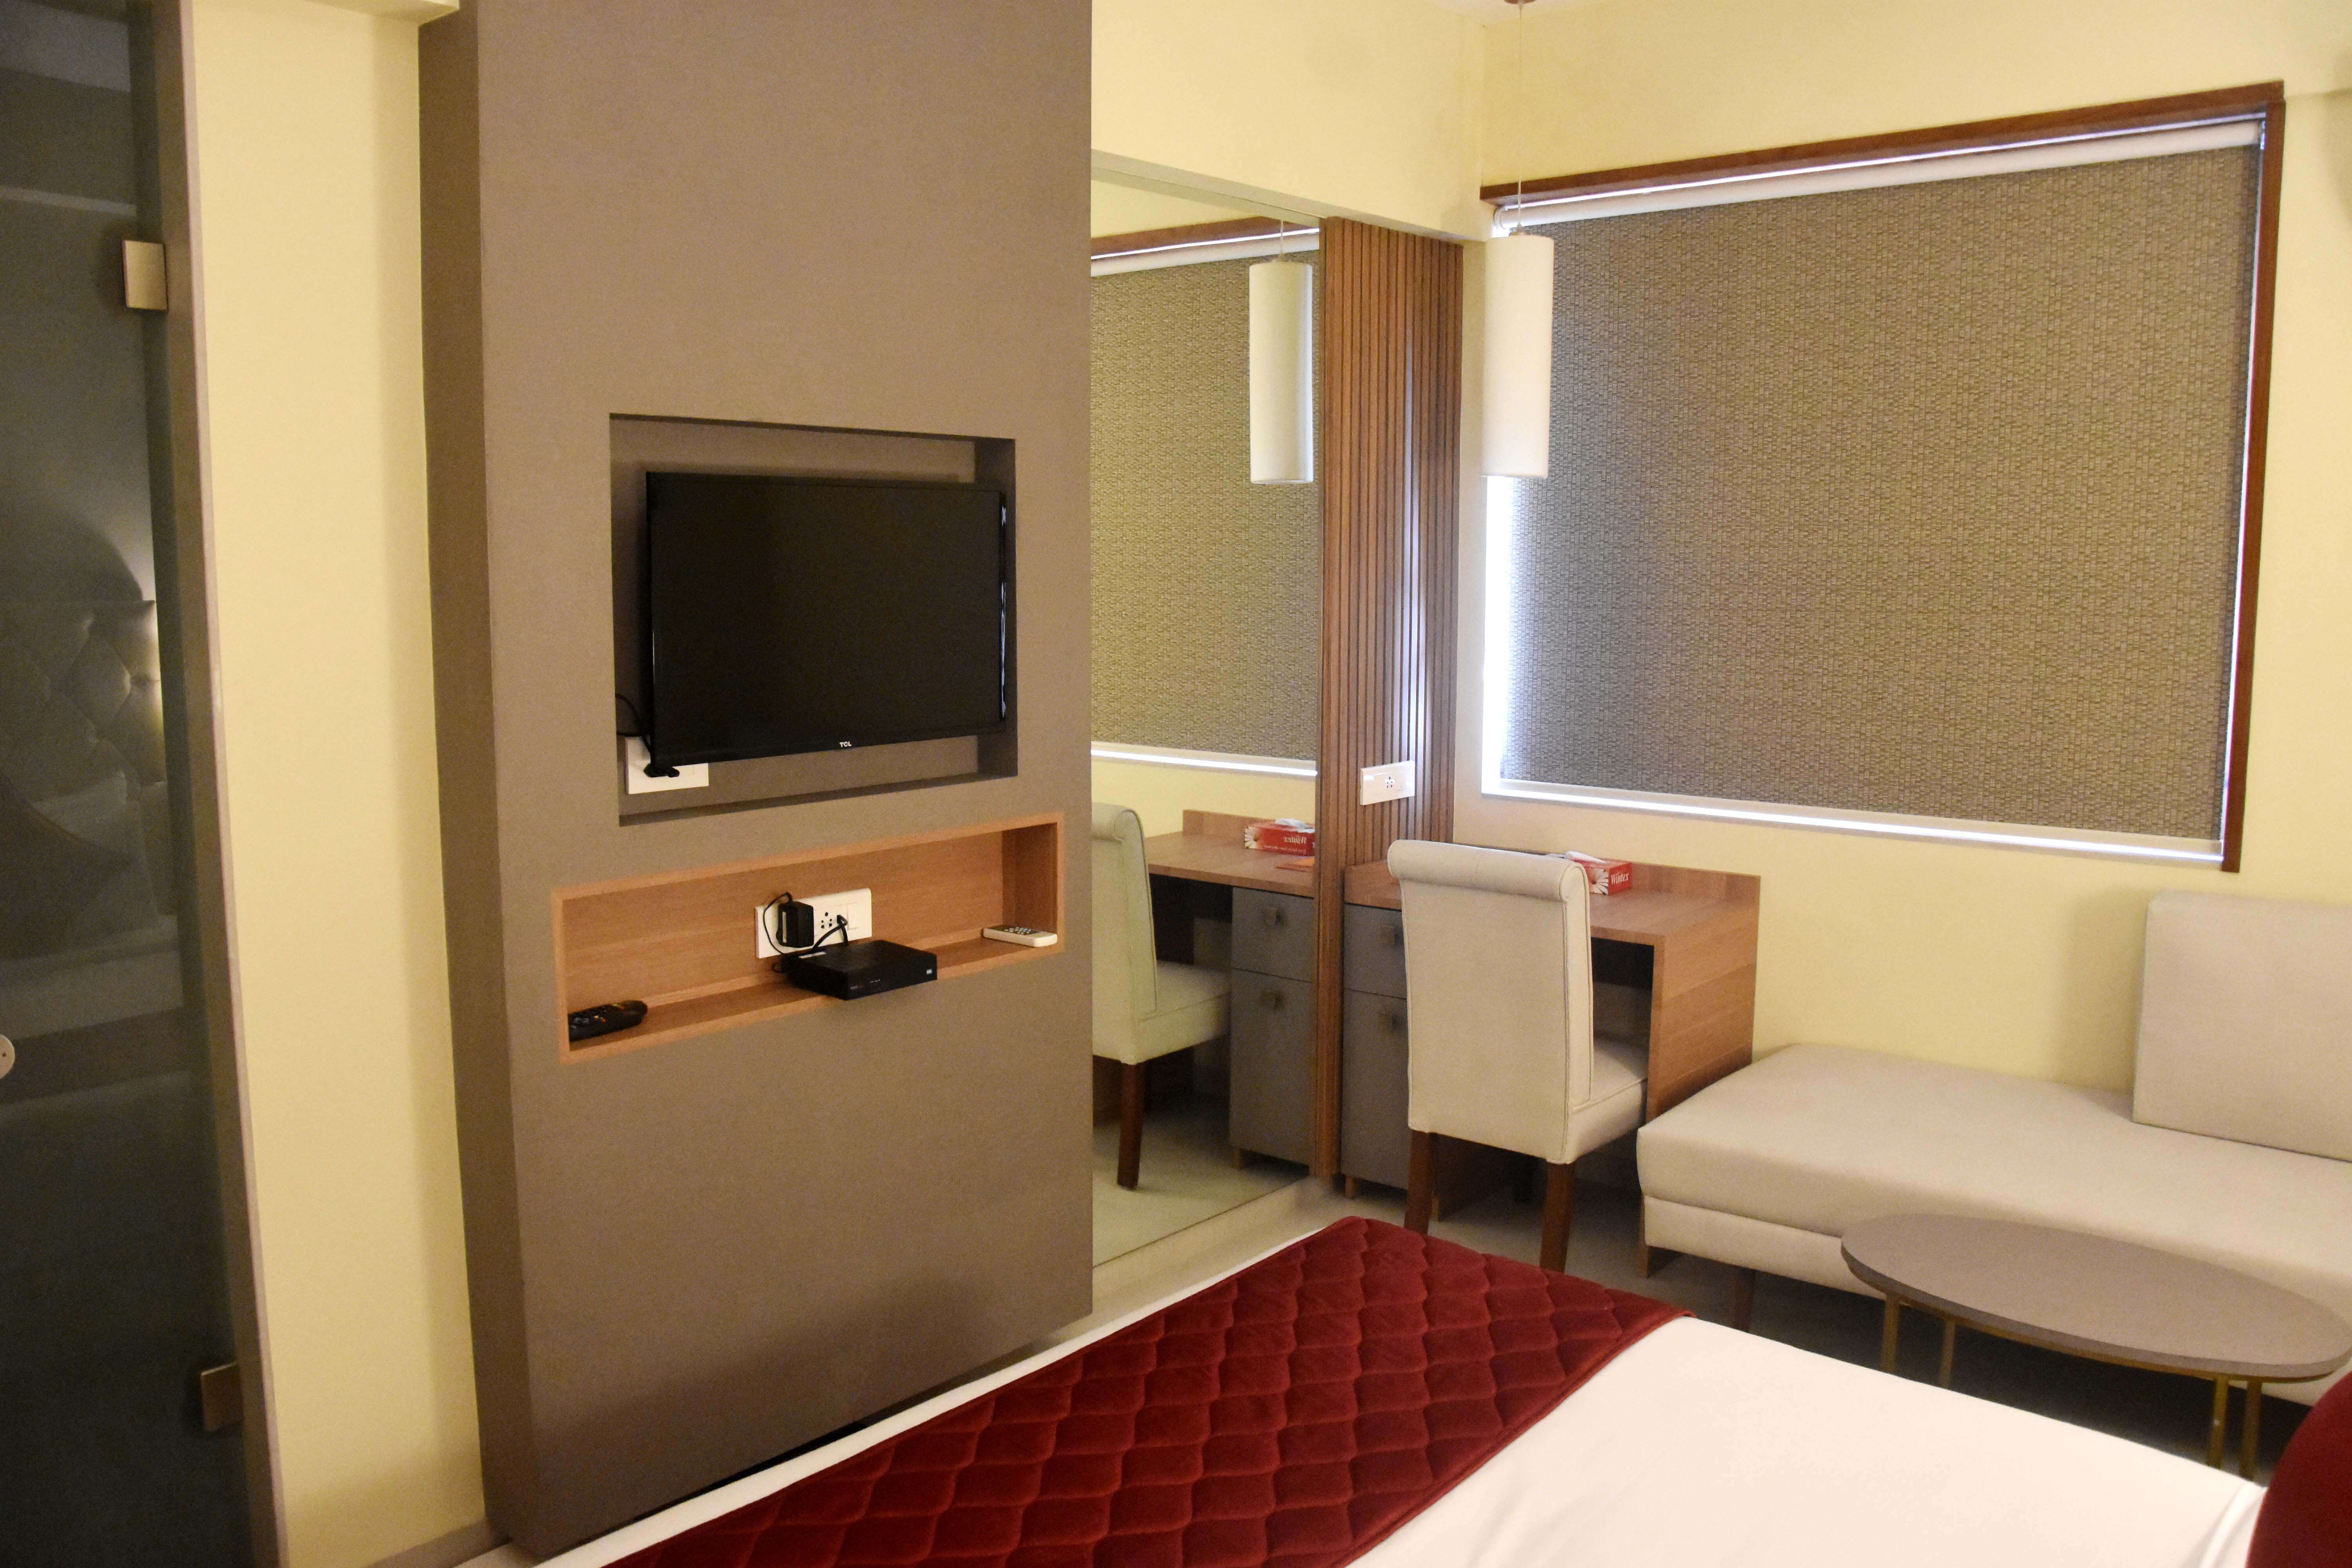 Rooms with immense Serene and warmth atmosphere